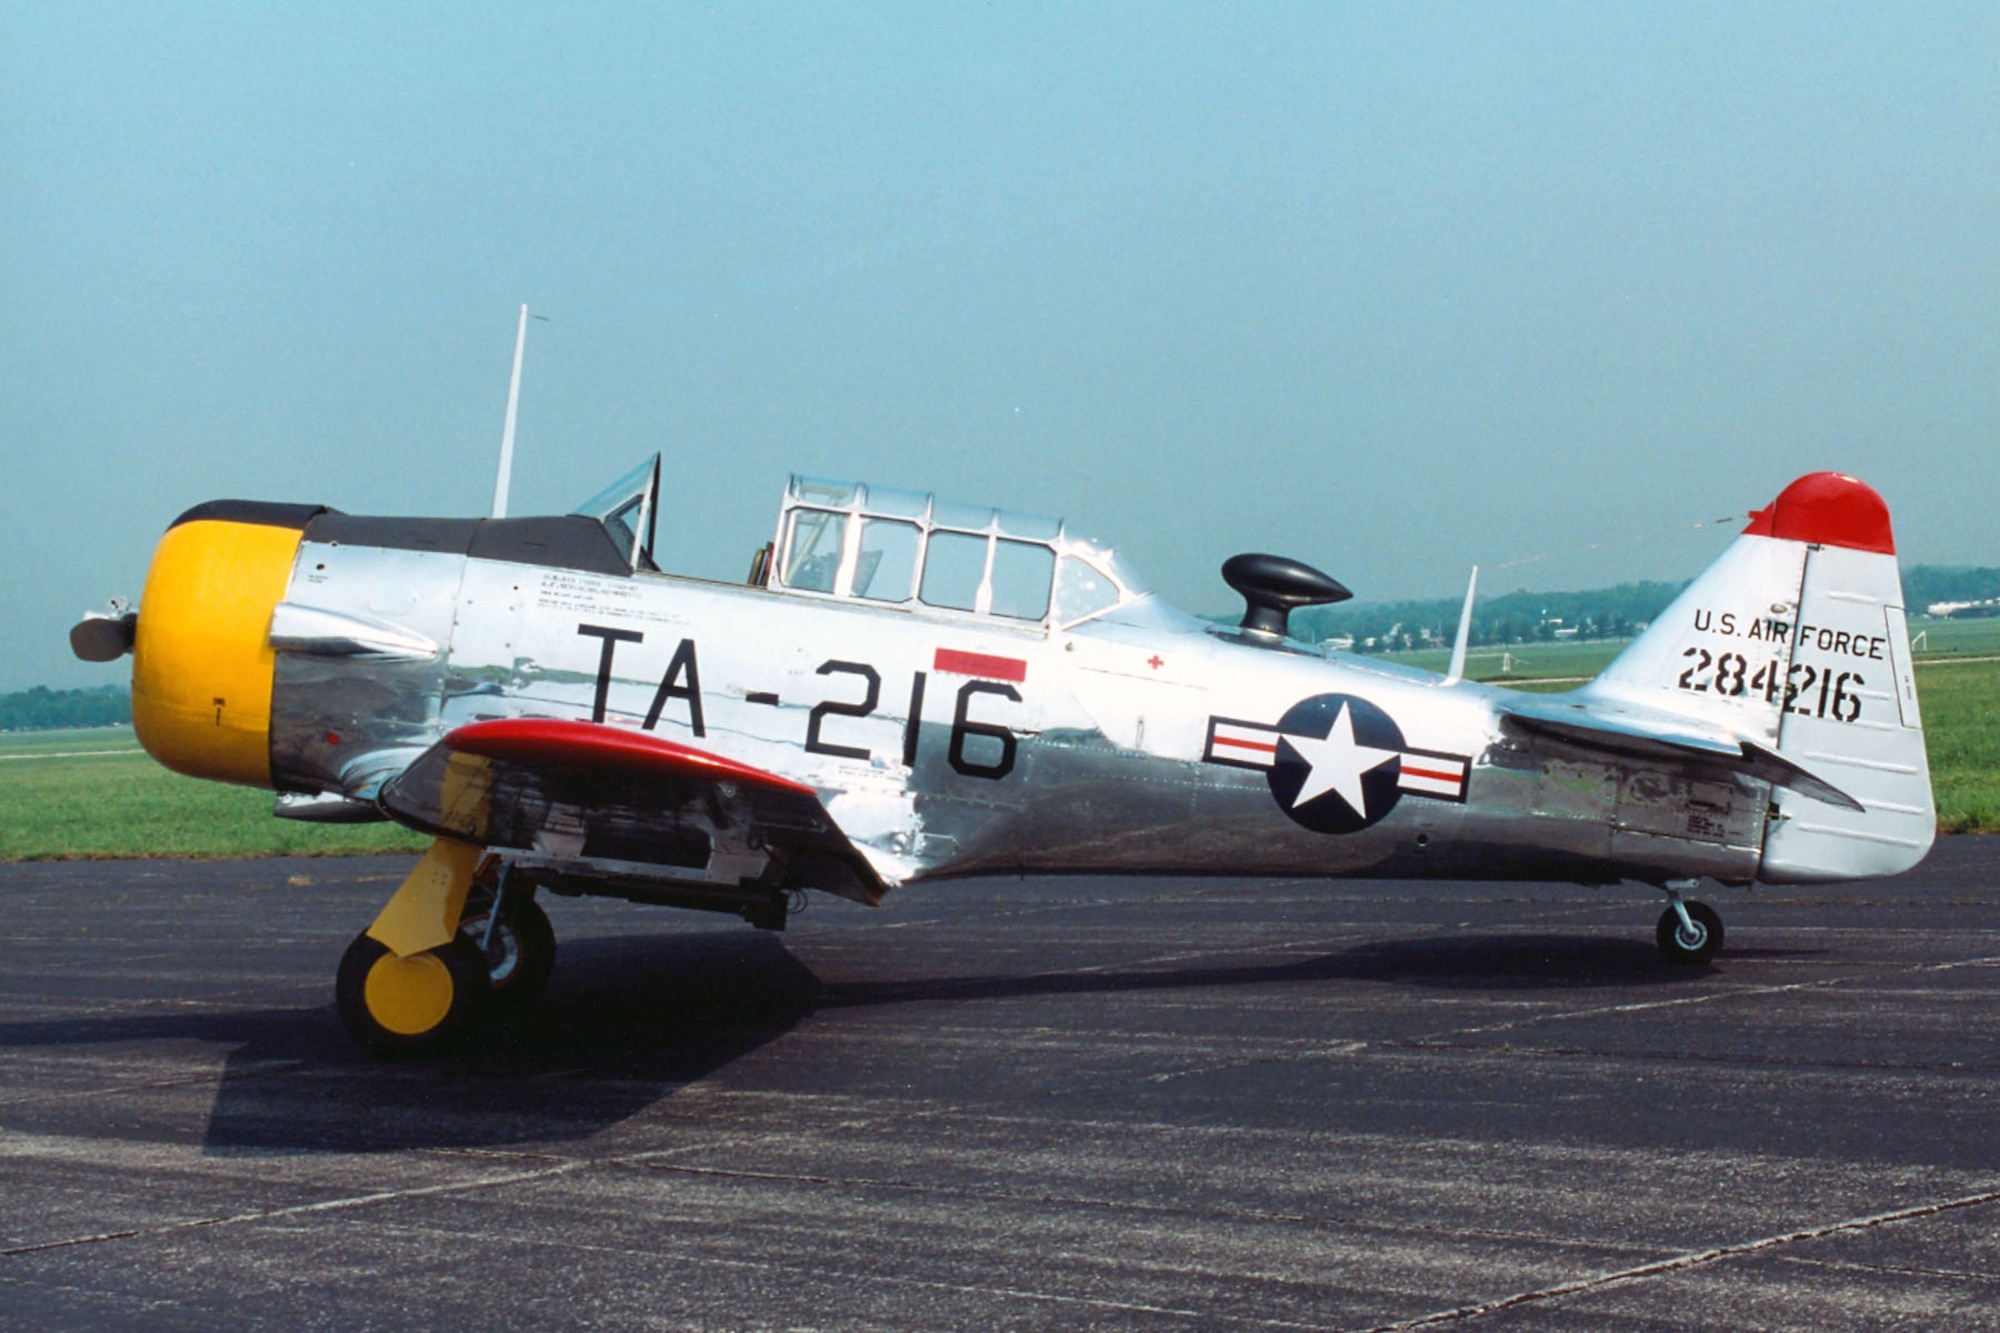 DAYTON, Ohio -- North American T-6D "Mosquito" at the National Museum of the United States Air Force. (U.S. Air Force photo)